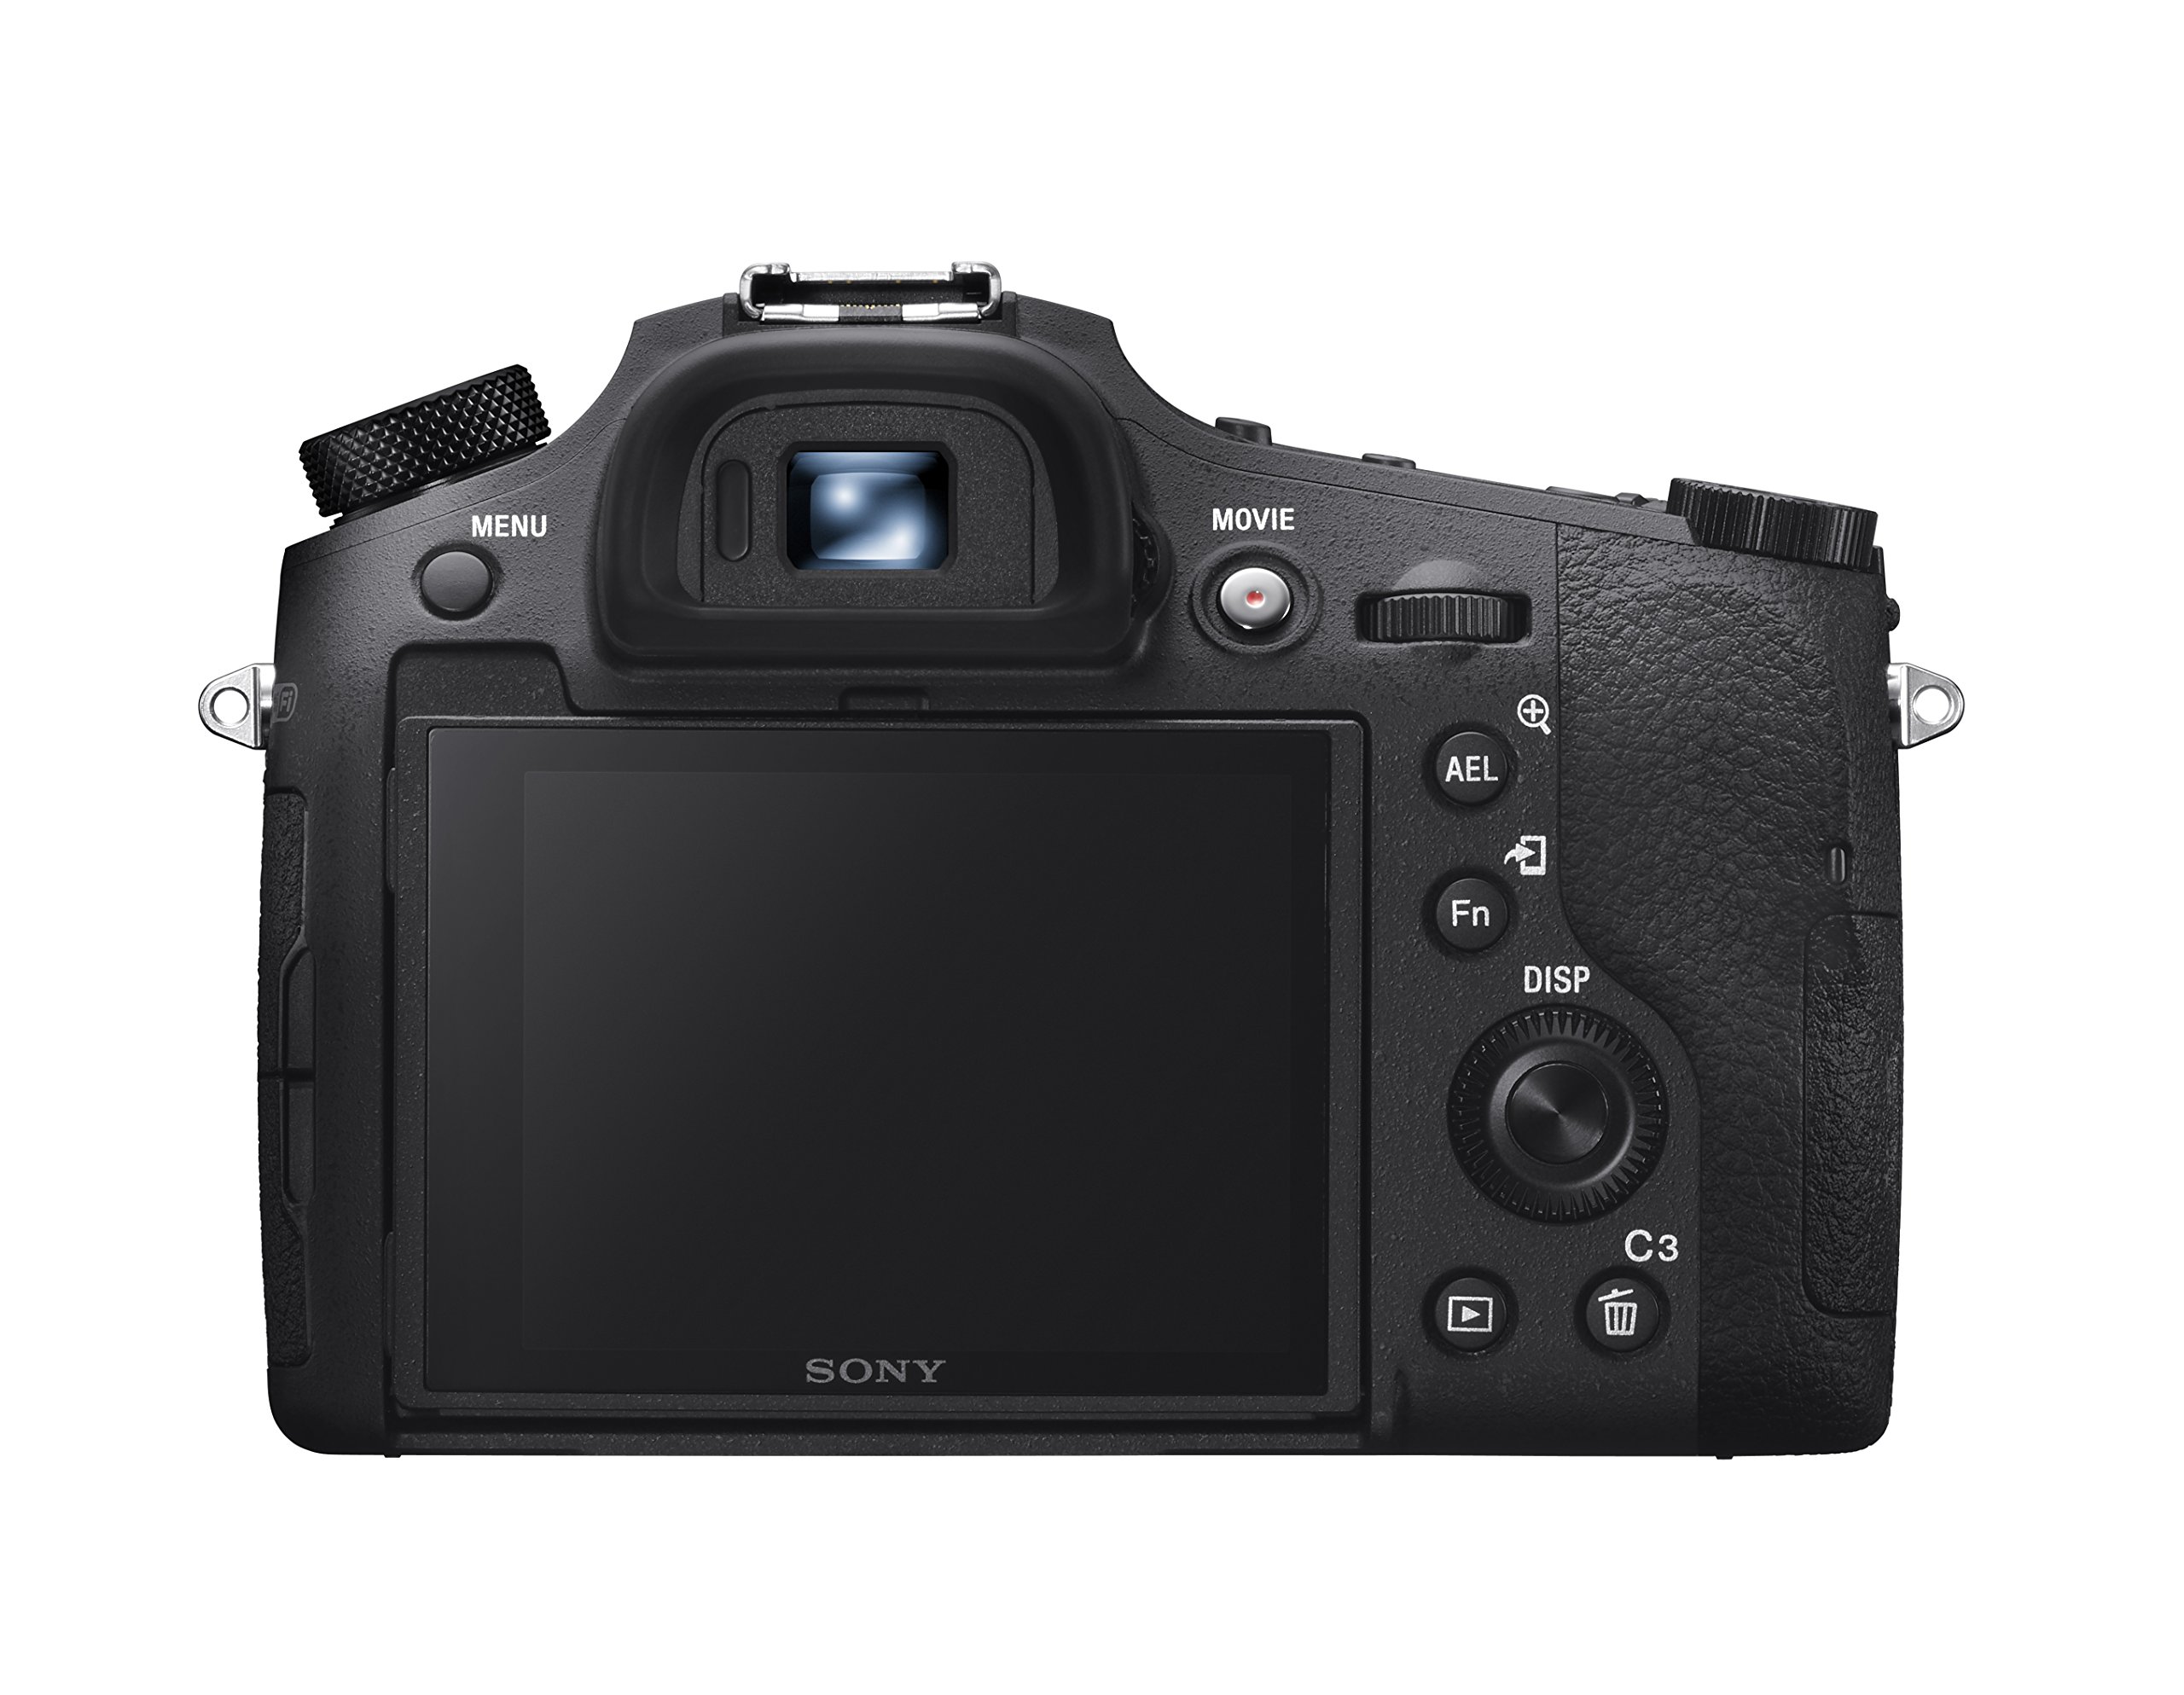 Sony Cyber‑Shot RX10 IV with 0.03 Second Auto-Focus & 25x Optical Zoom (DSC-RX10M4), Black